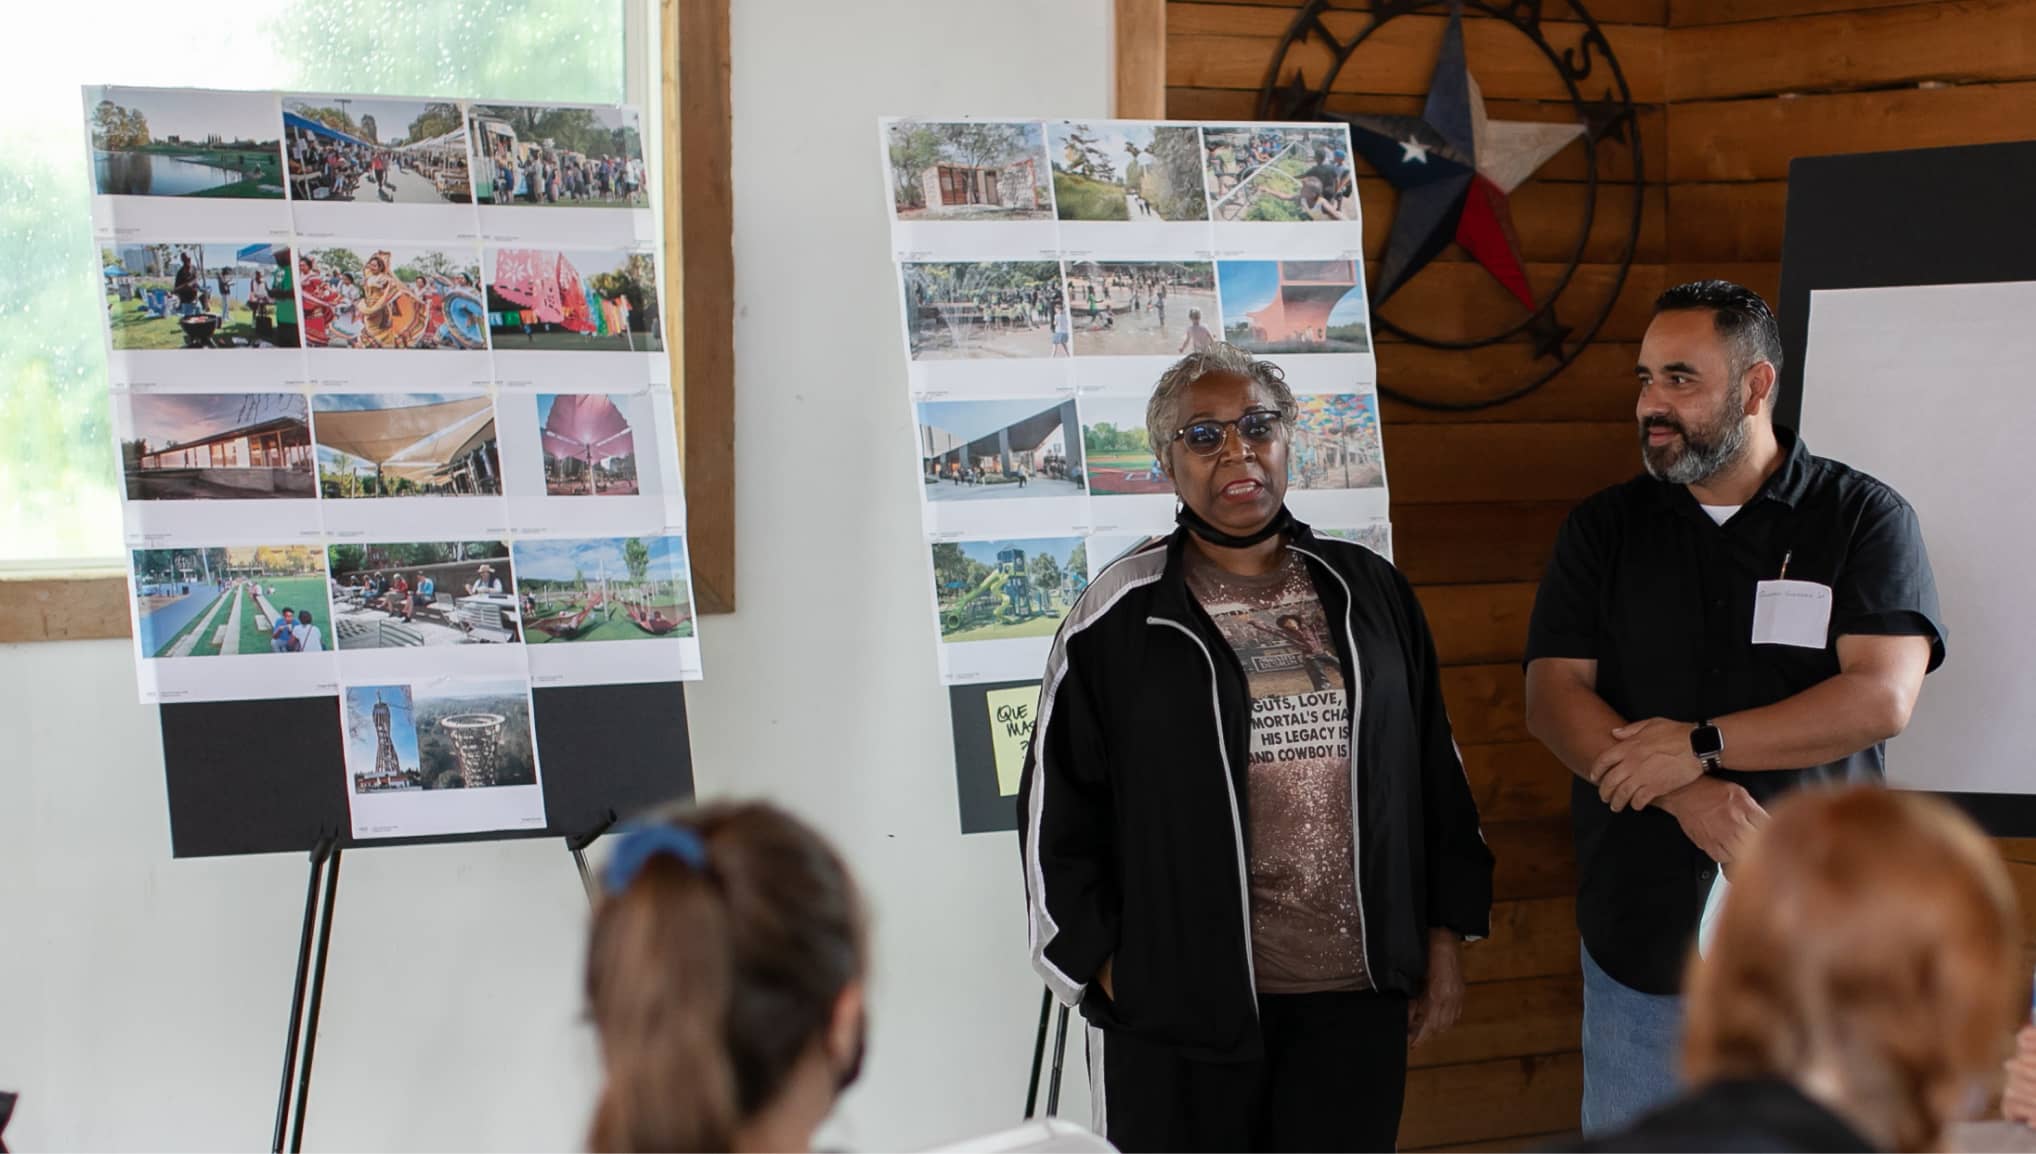 Marsha Jackson and her neighbors, many of whom have lived in the area for decades, gather at a community meeting to discuss the Floral Farms park plan.